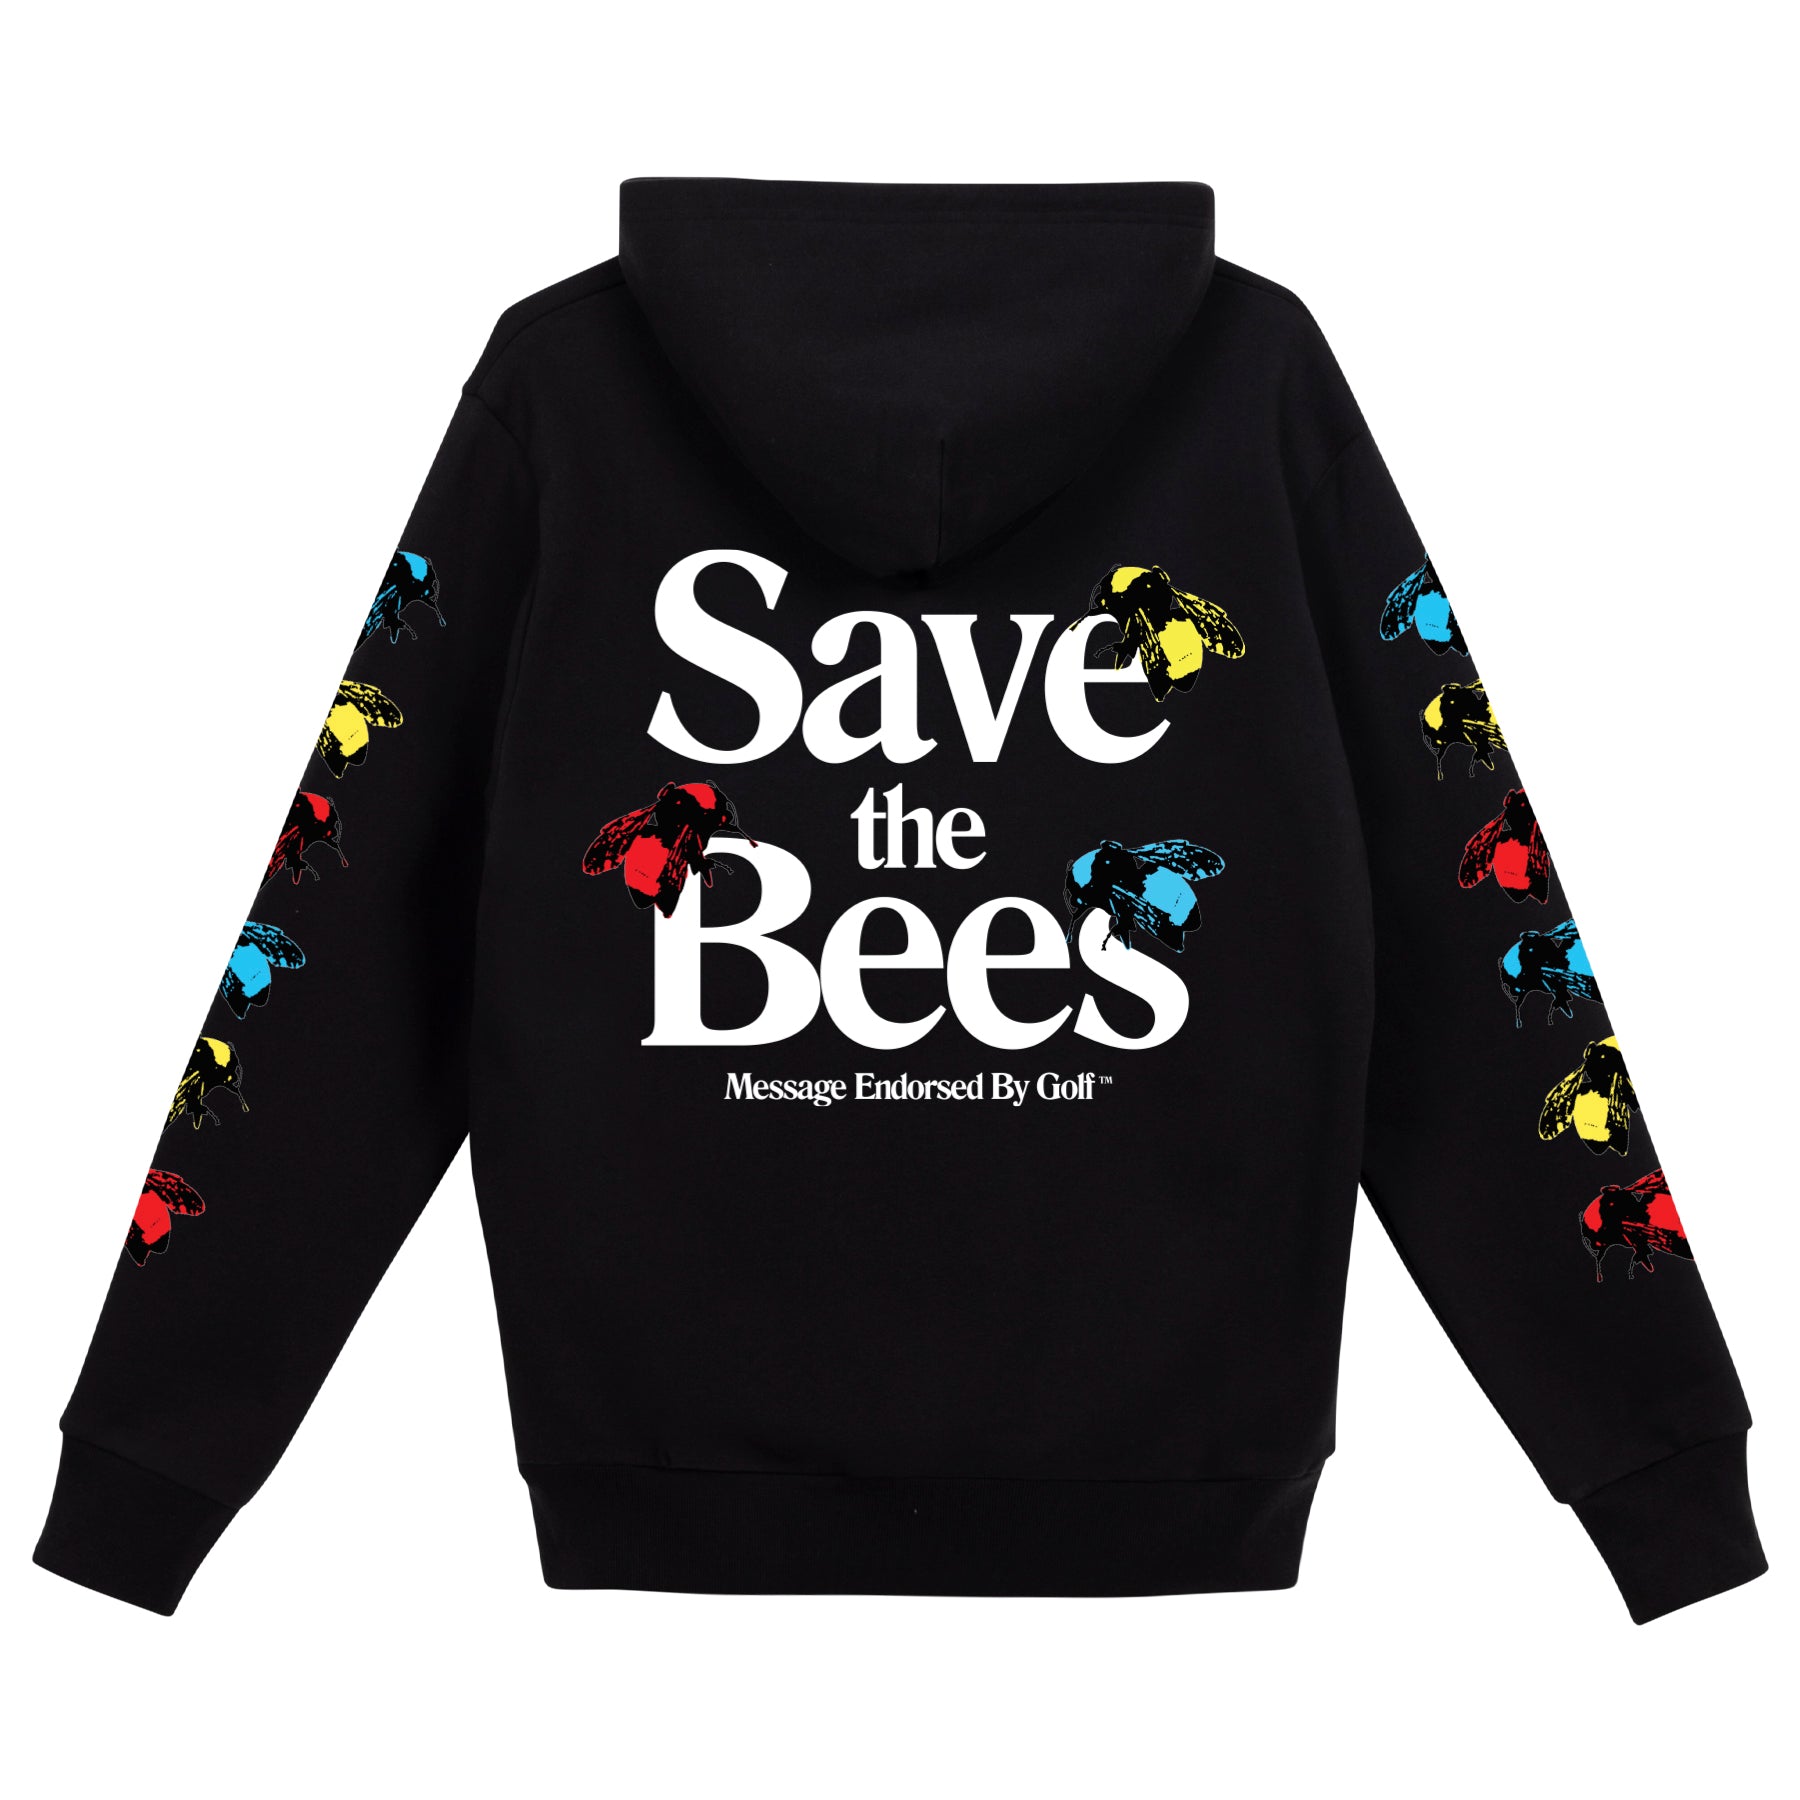 SAVE THE BEES HOODIE by GOLF WANG – Golf Wang